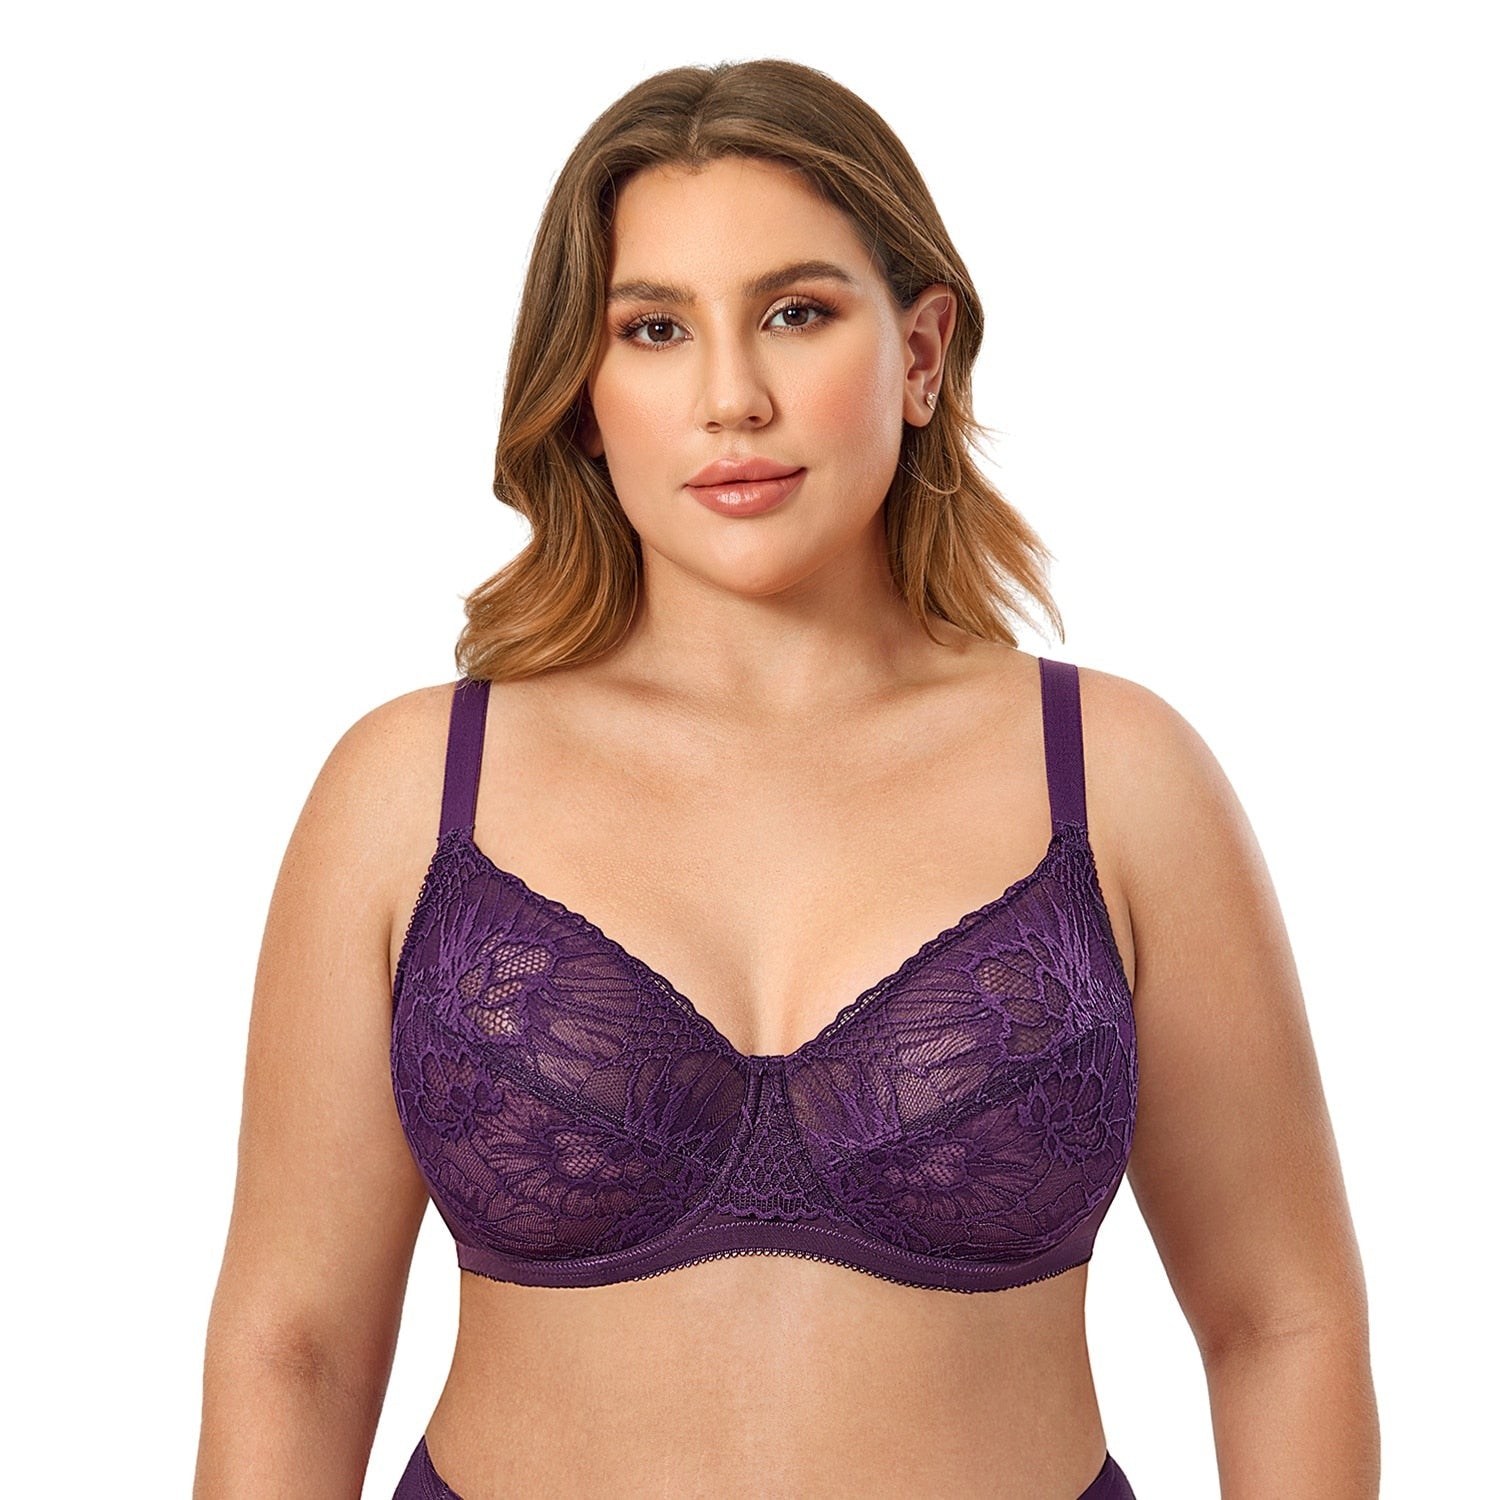 Cup Bra - Buy Full Cup Bra for Women Online (Page 32)